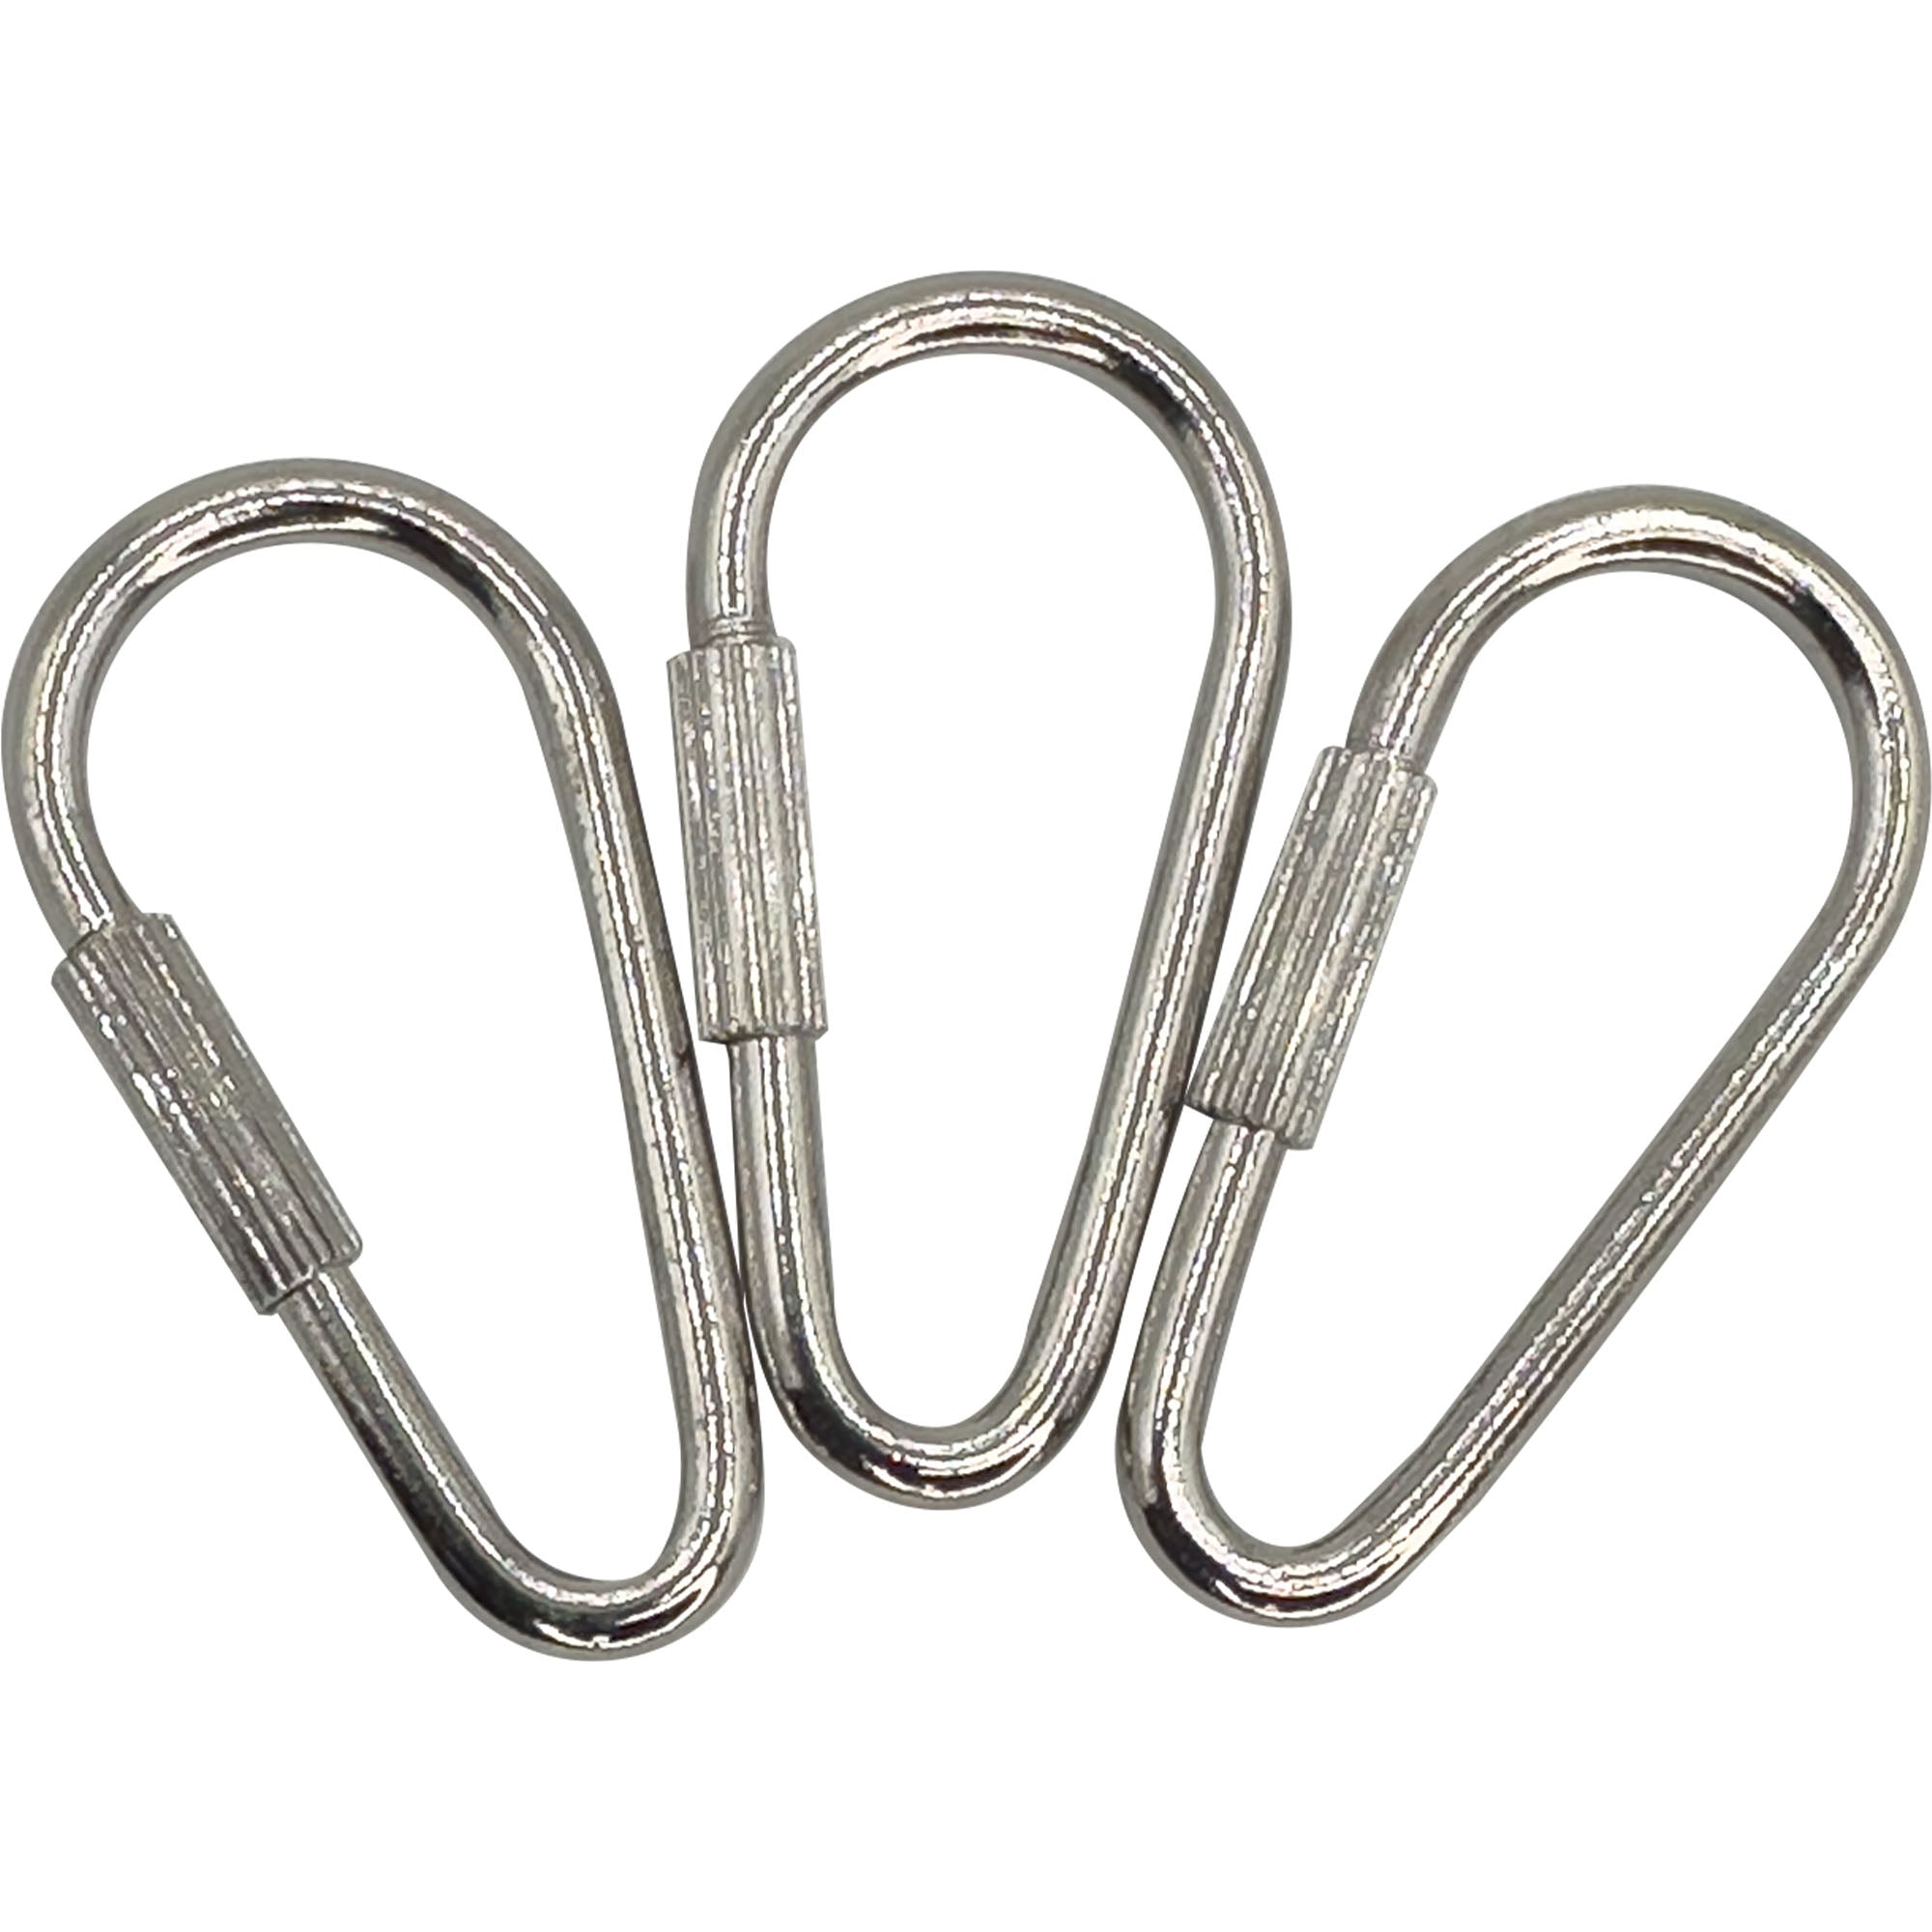 7028 Pk3 Nickel Plated Steel Quick Link 1 5/8 Inch